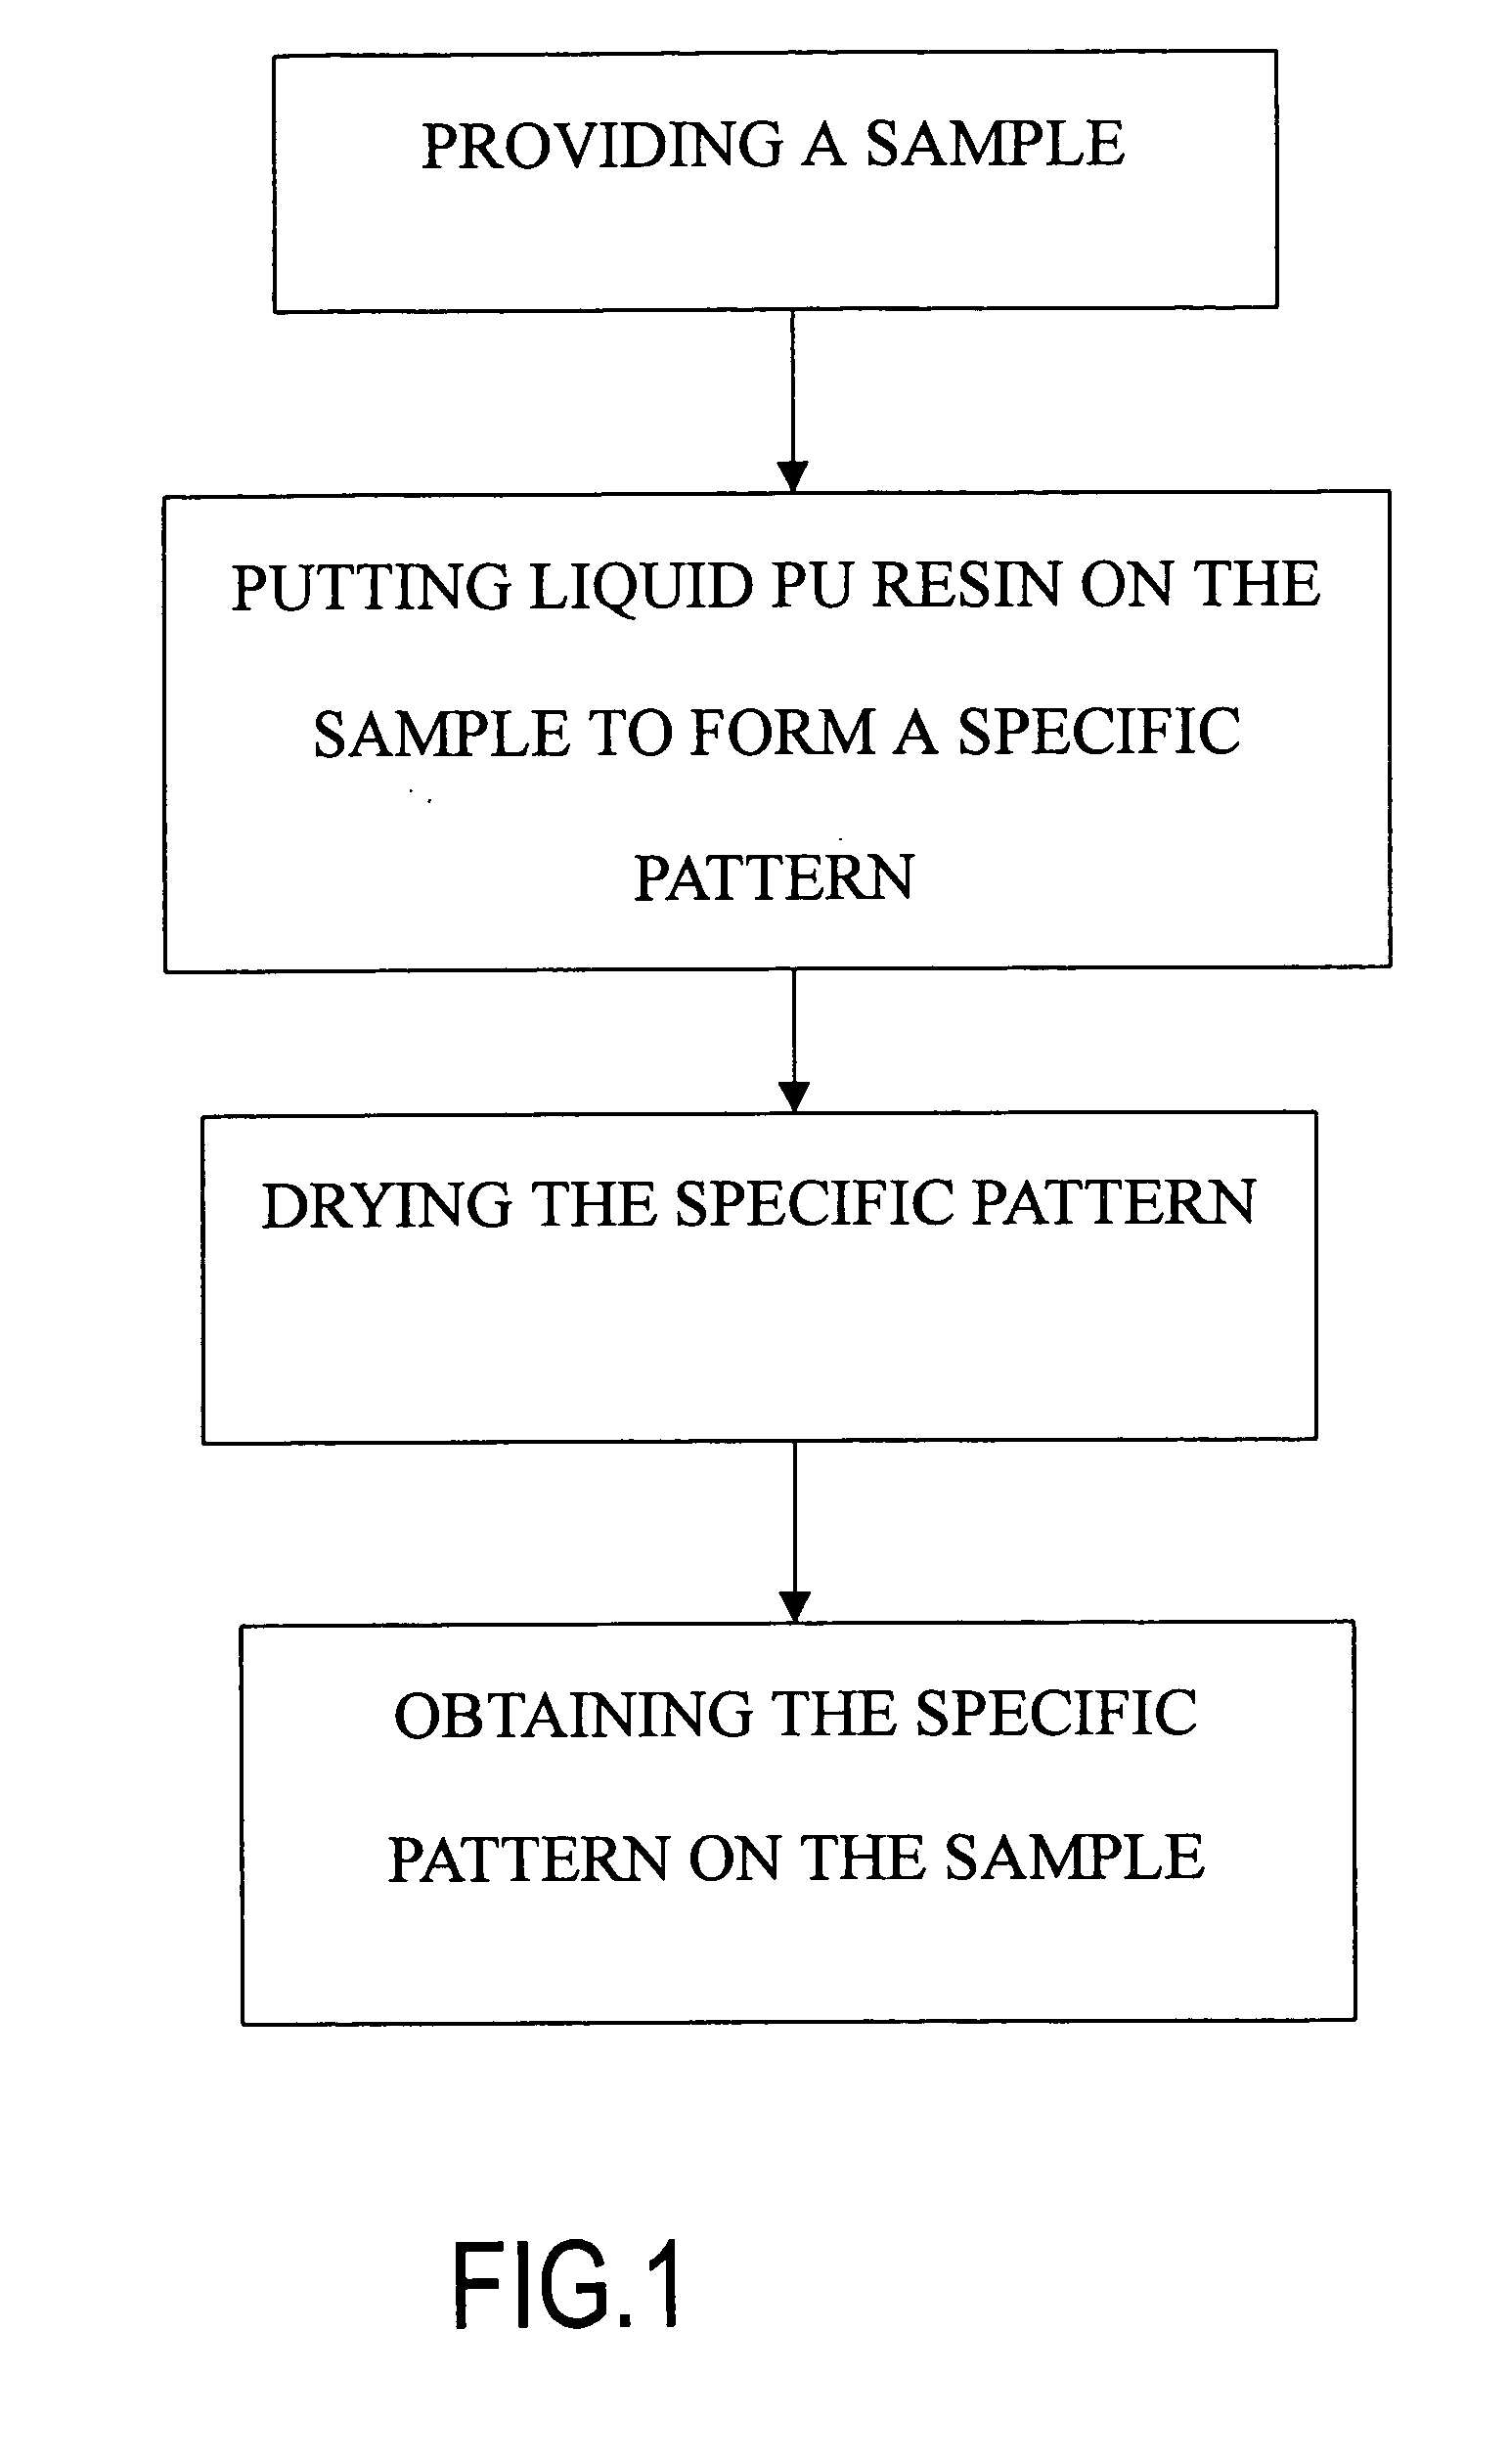 Method for applying surface ornamentation on material of shoes, bags or clothing